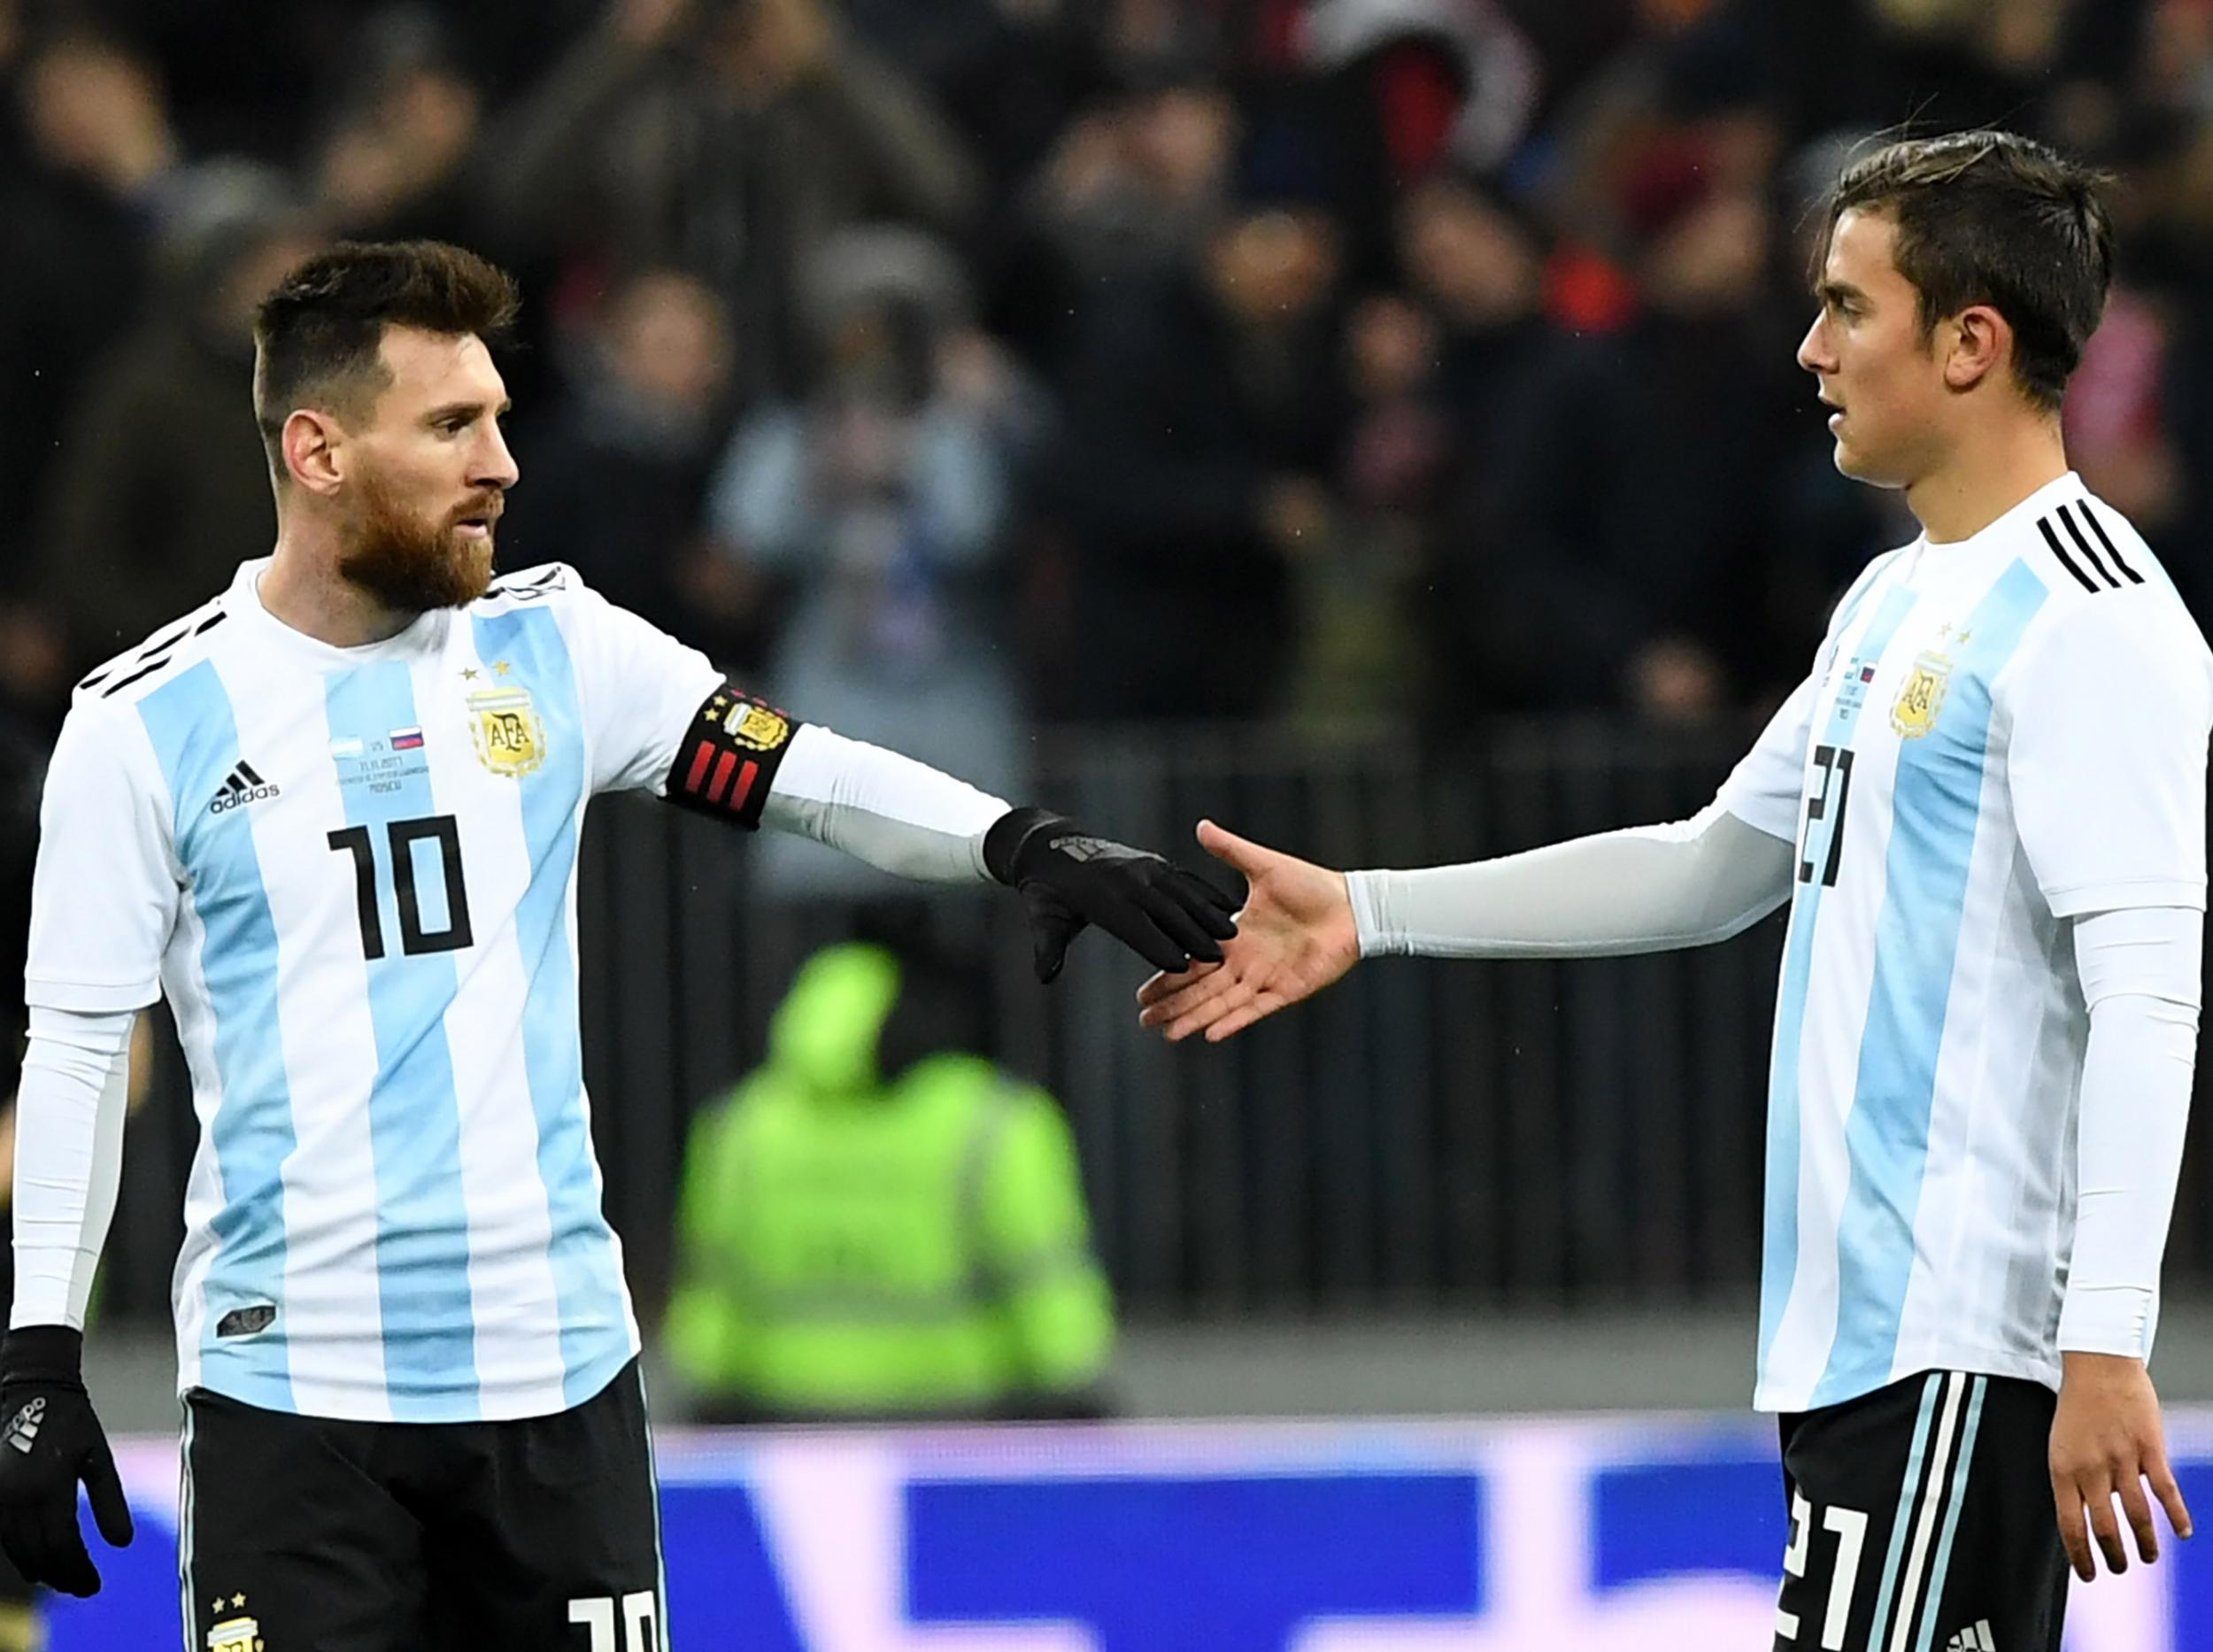 Dybala has been tipped to take over from Lionel Messi as the world's best once the Barca star retires